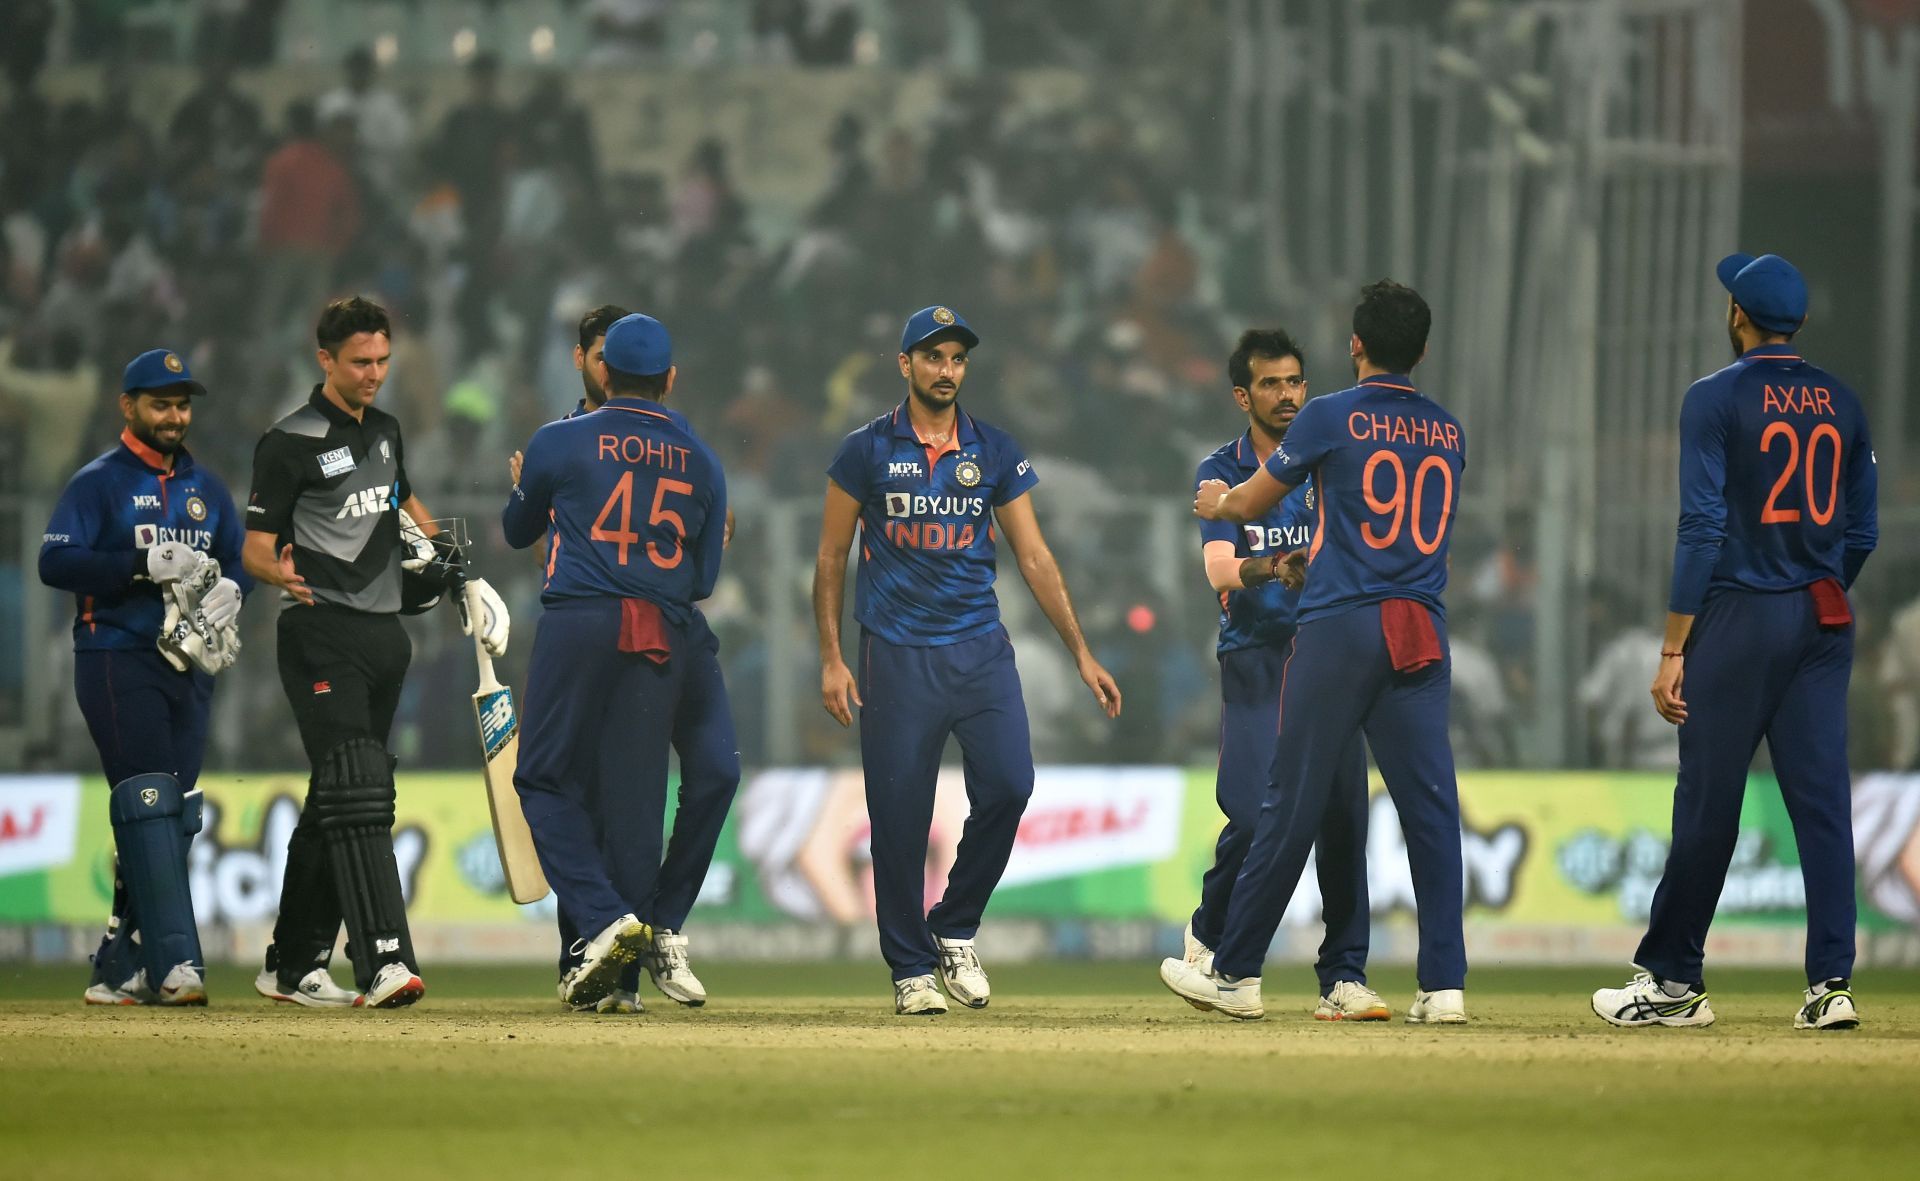 India were irresistible throughout the T20I series against New Zealand